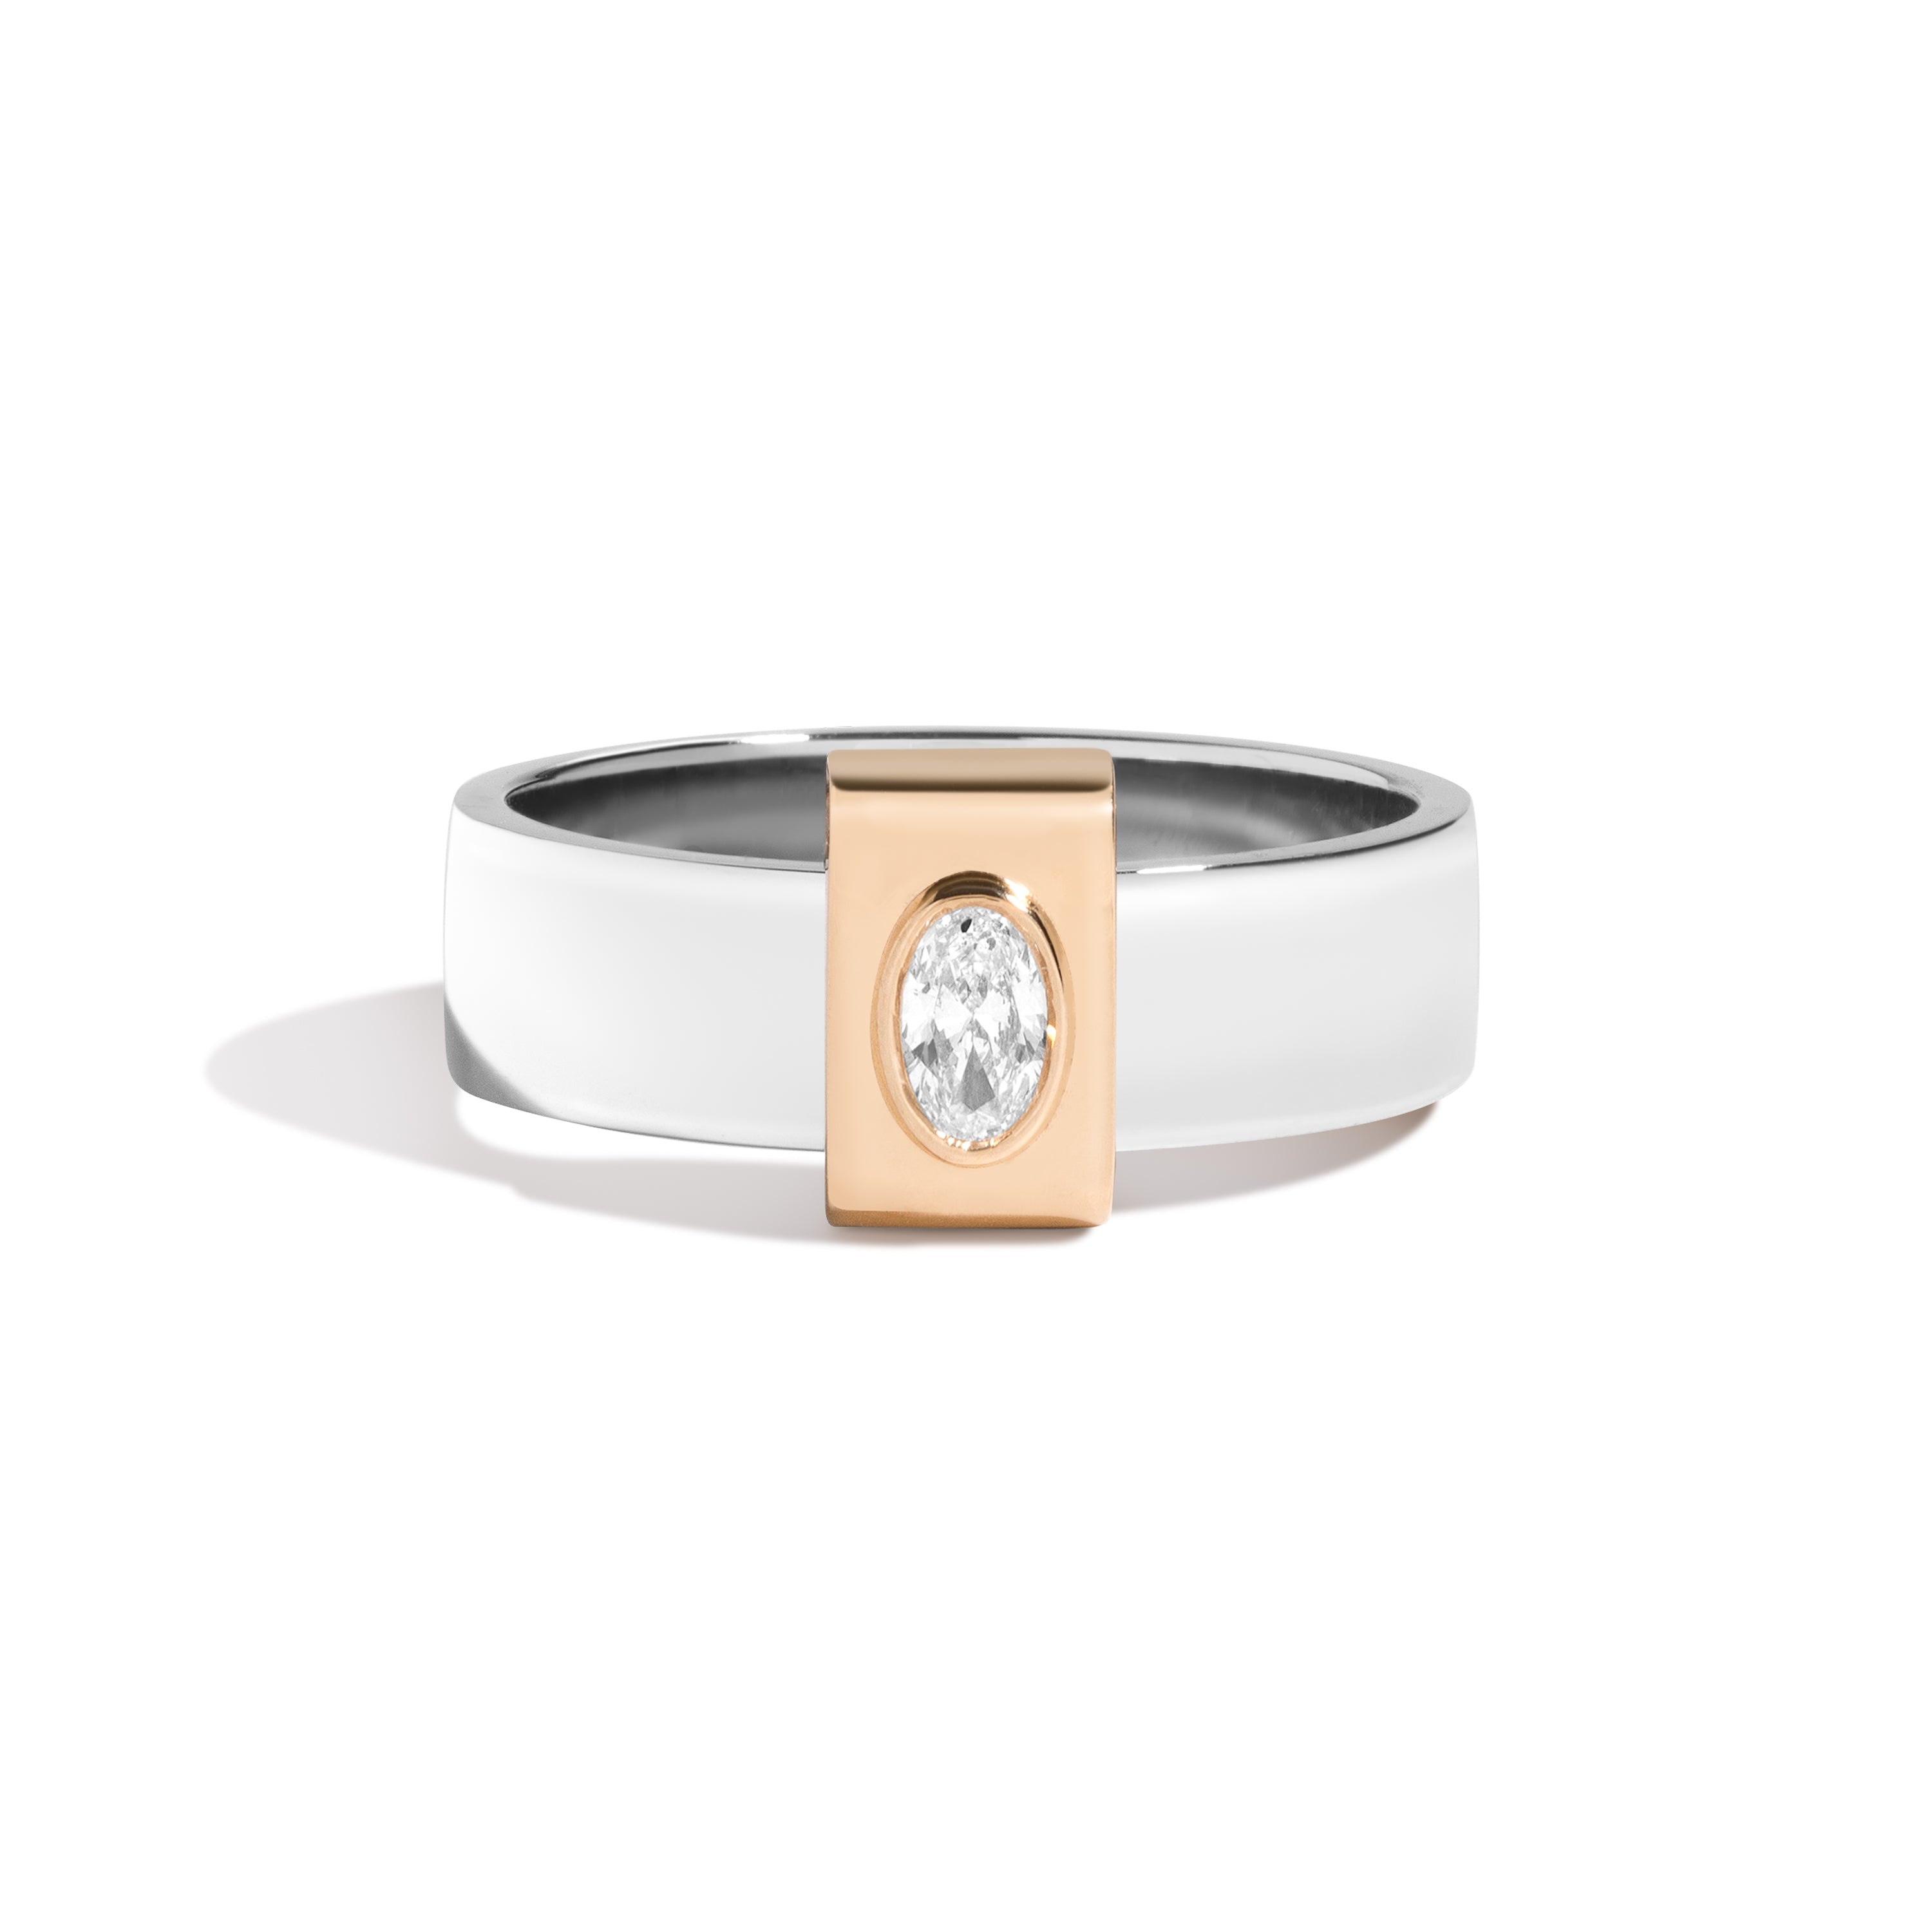 Shahla Karimi Signature Platinum 6mm Band With Oval 14K Yellow Gold Wrap